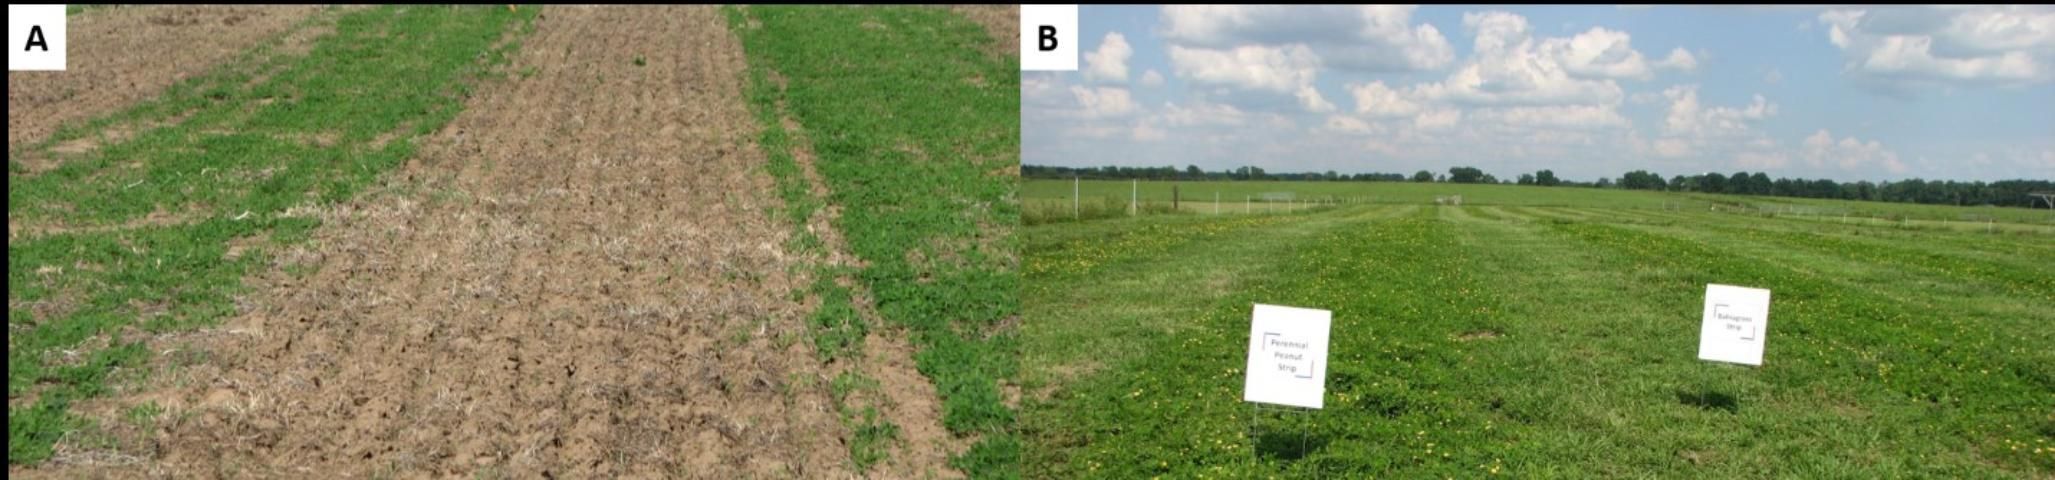 Figure 3. Strip-planting of RPP and bahiagrass during the establishment year (A) and one year after established (B).